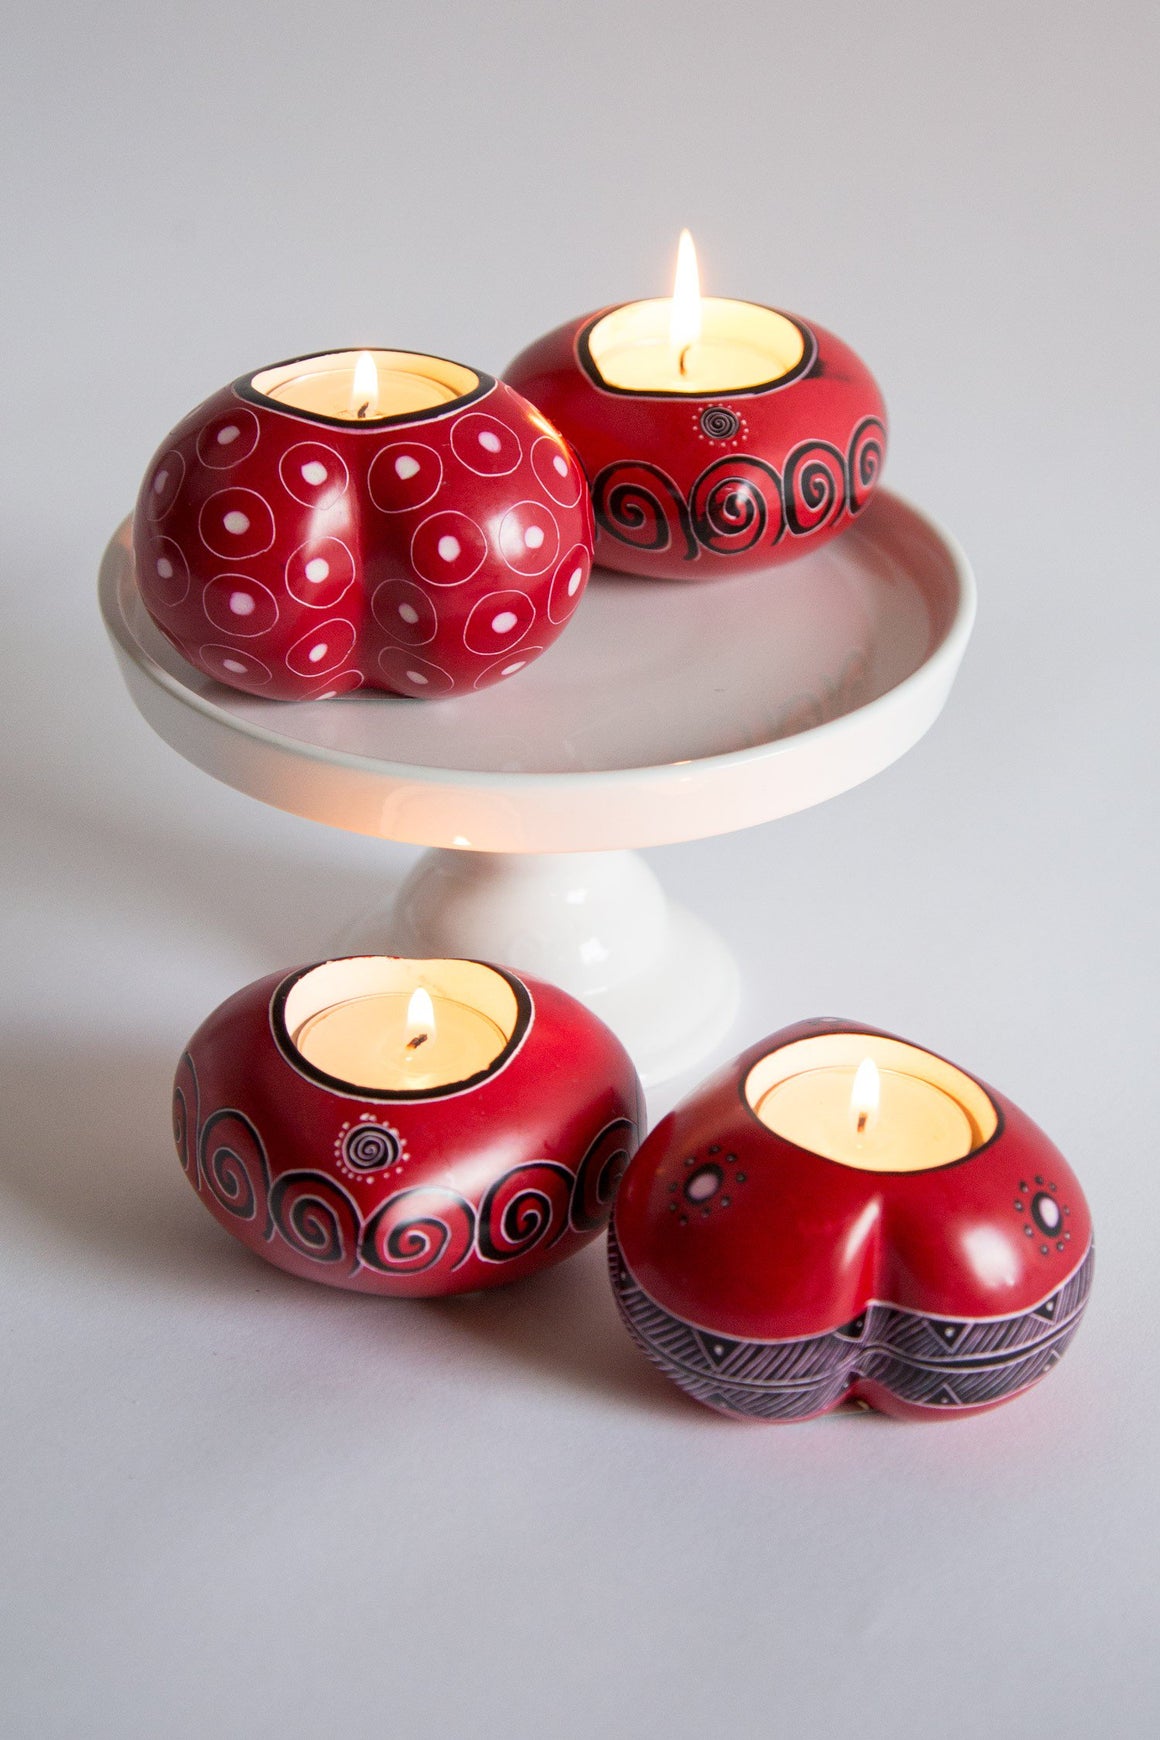 Kisii Stone Carved Heart Candleholder Handcrafted in Kenya